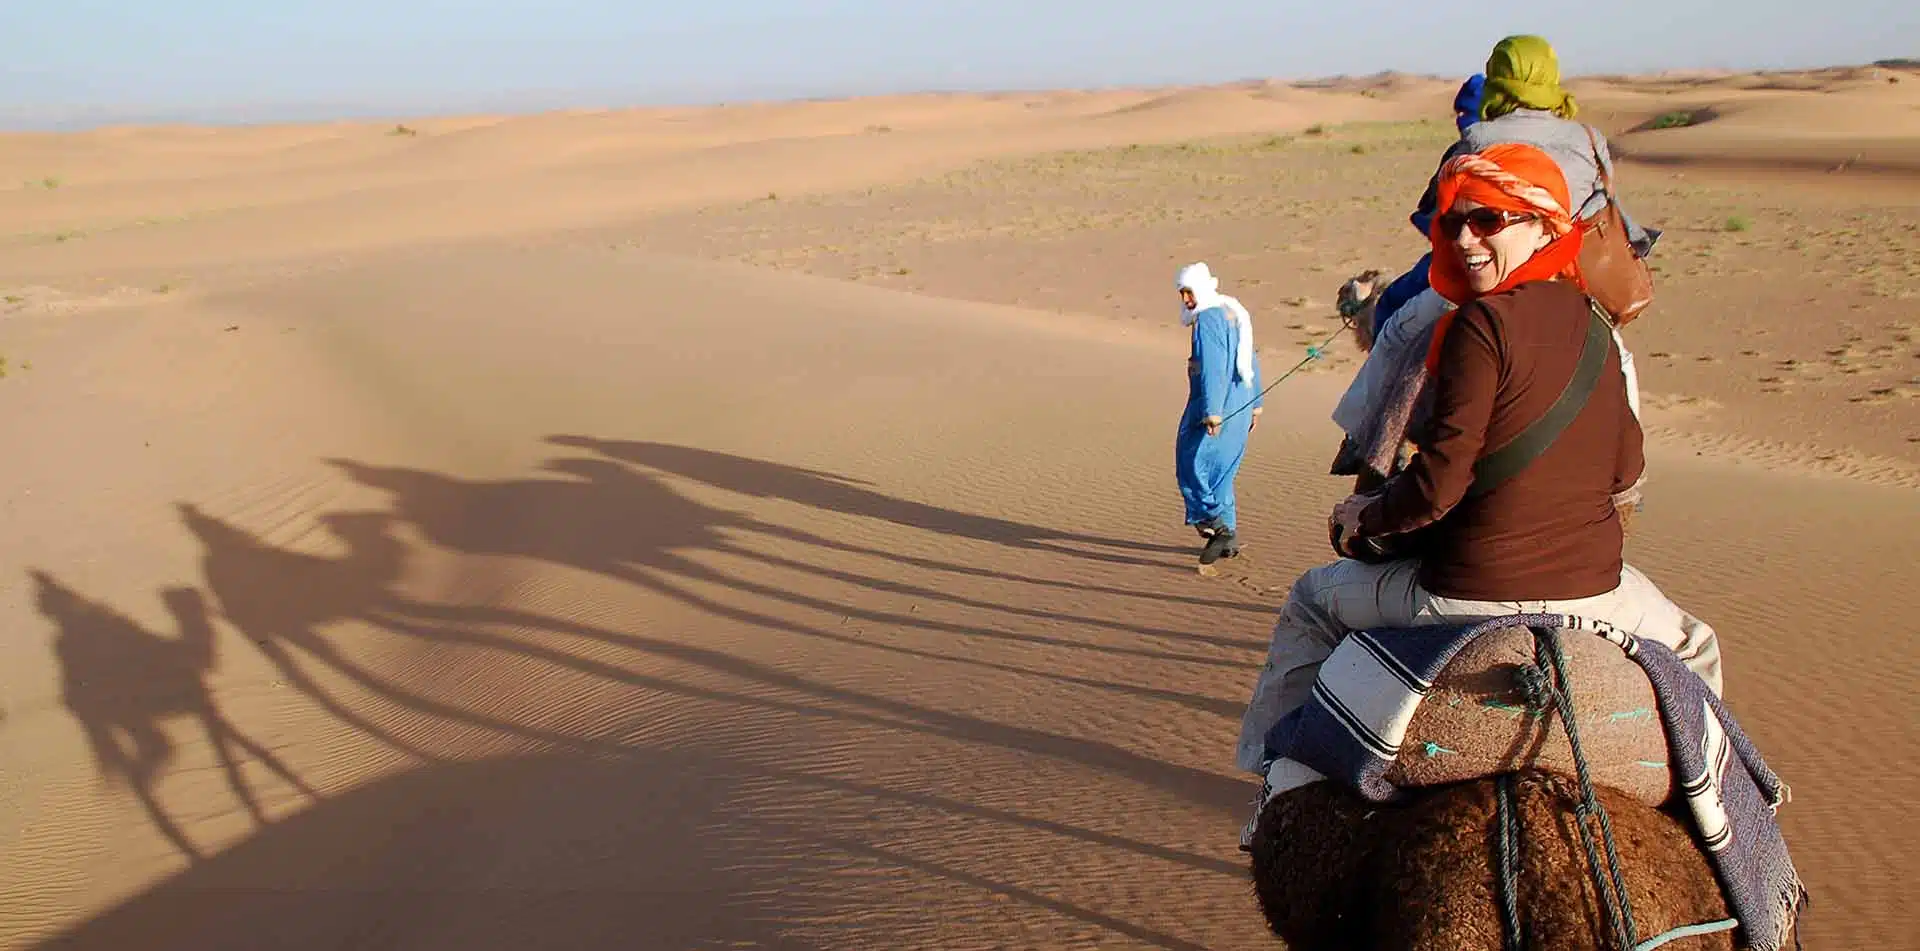 Classic Journeys Founder Susan Piegza on a camel in sand dunes of Morocco